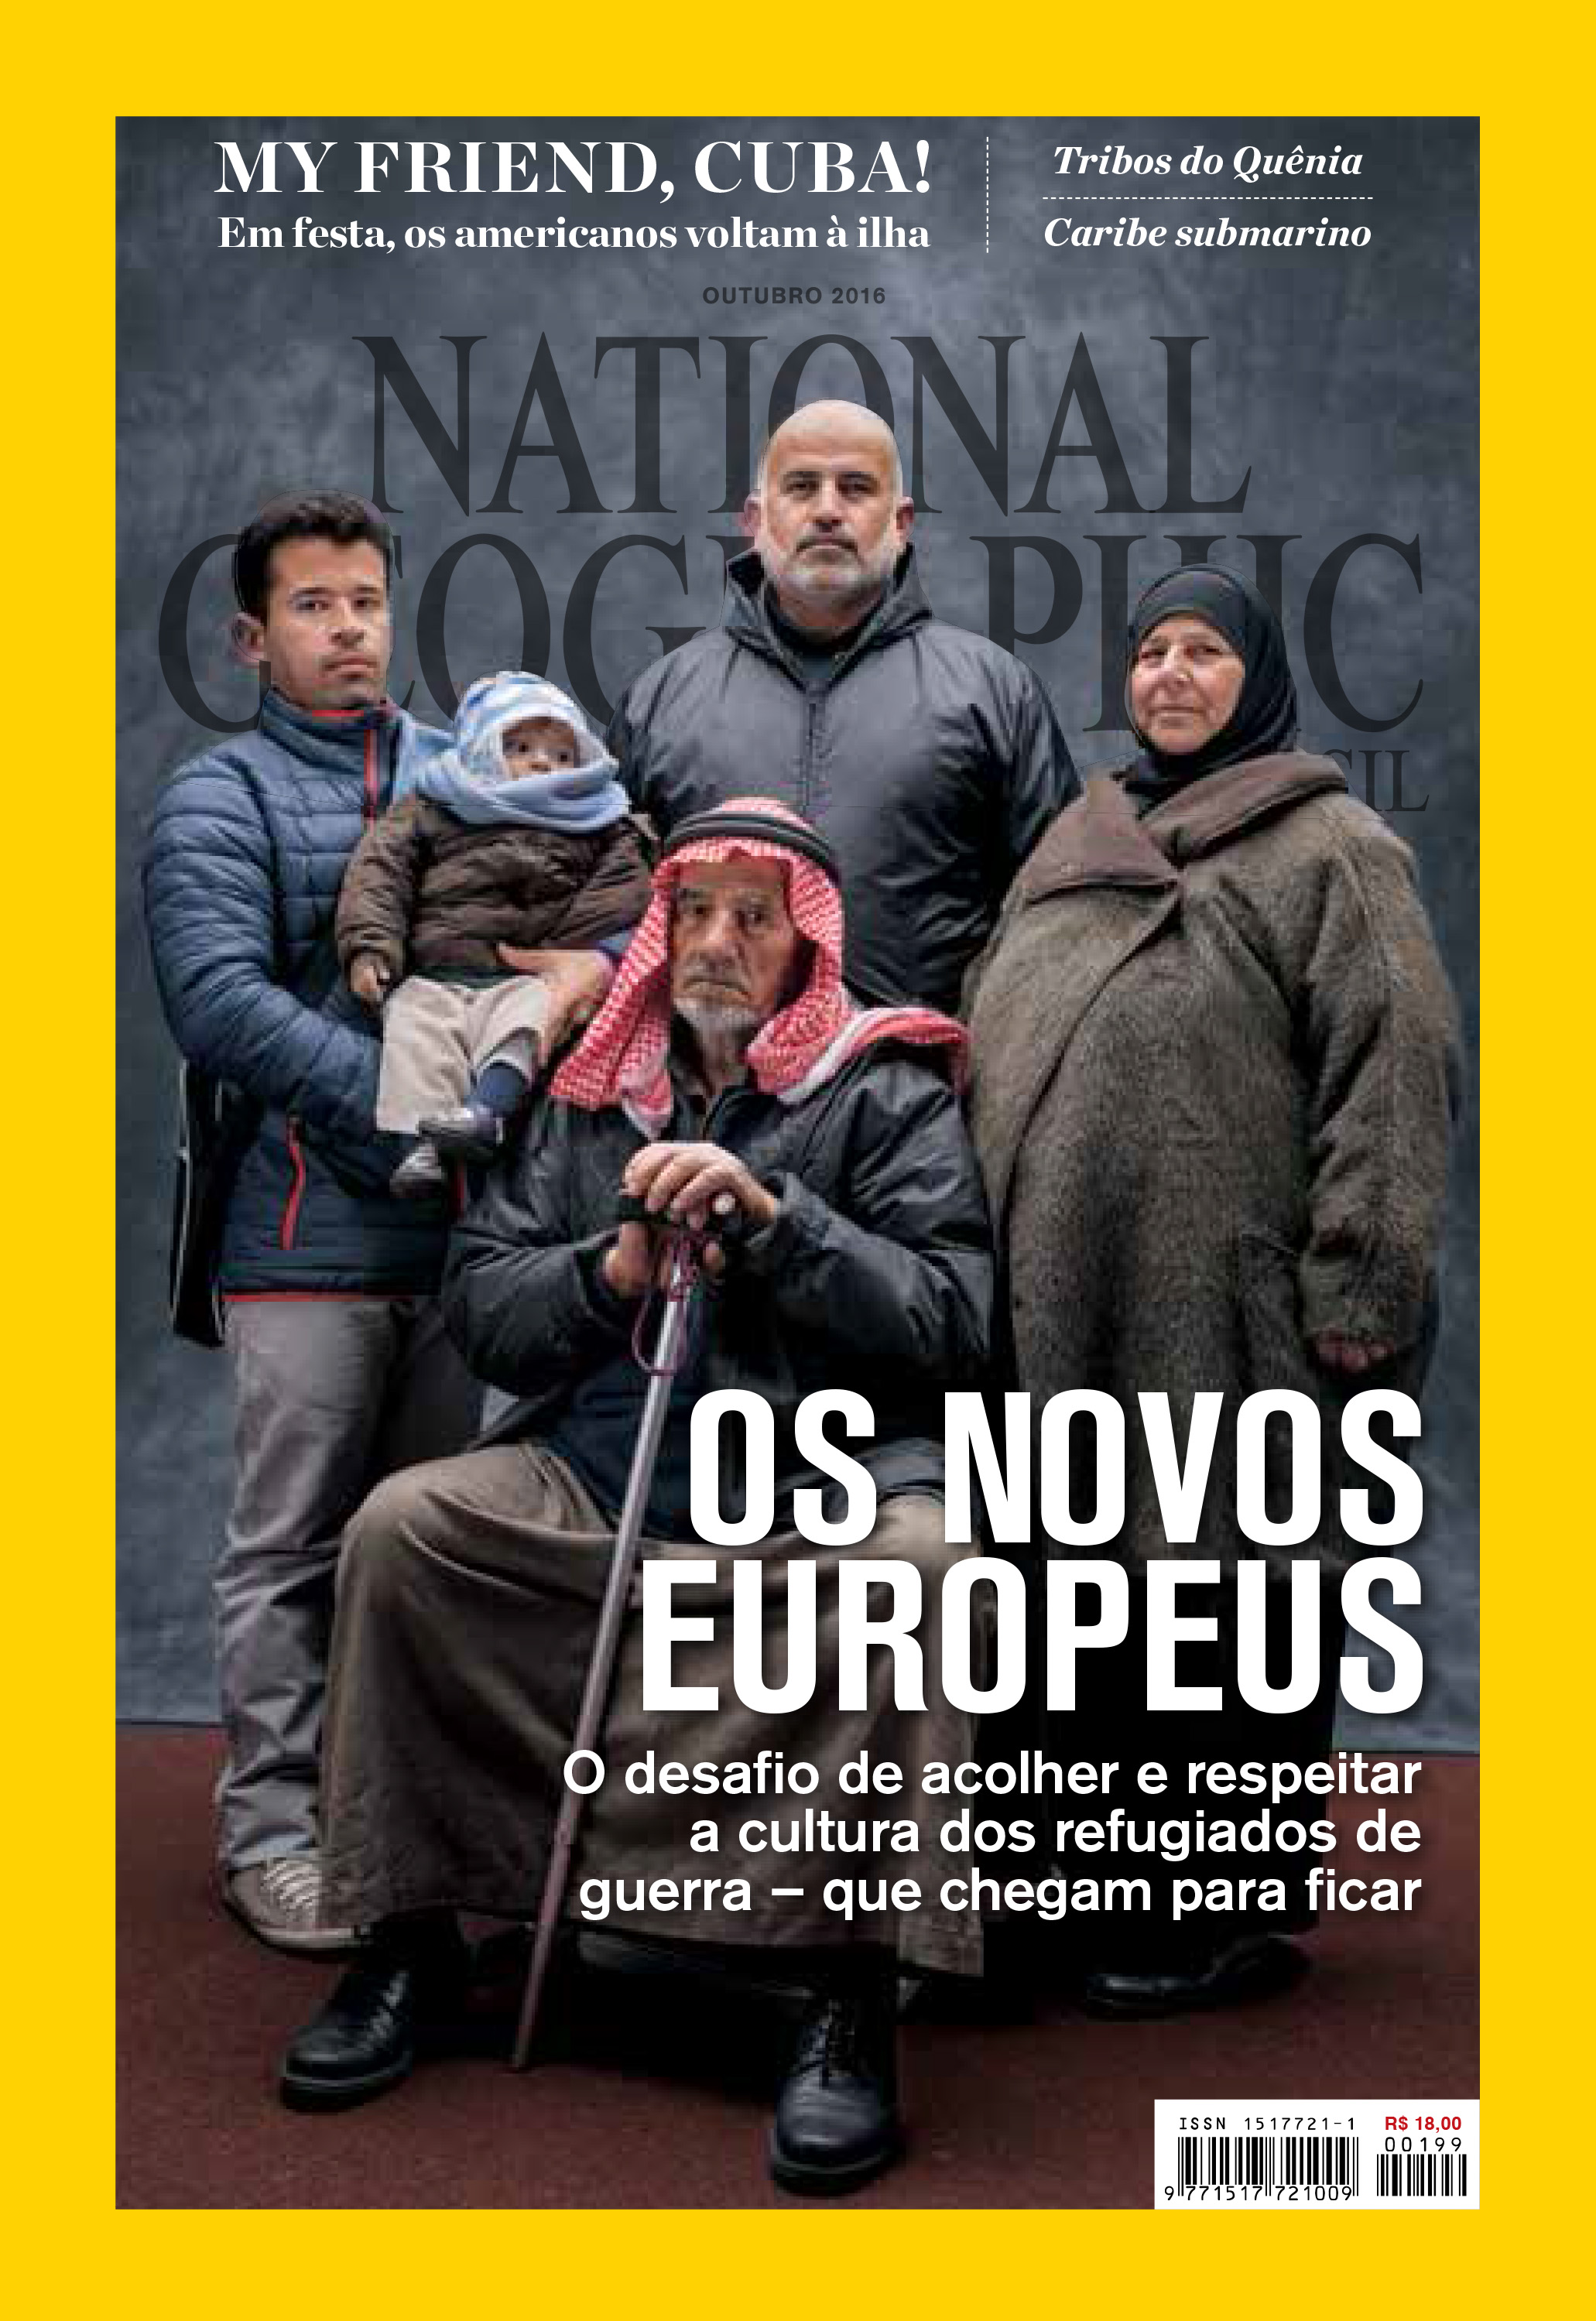 Image result for national geographic muslim new europeans